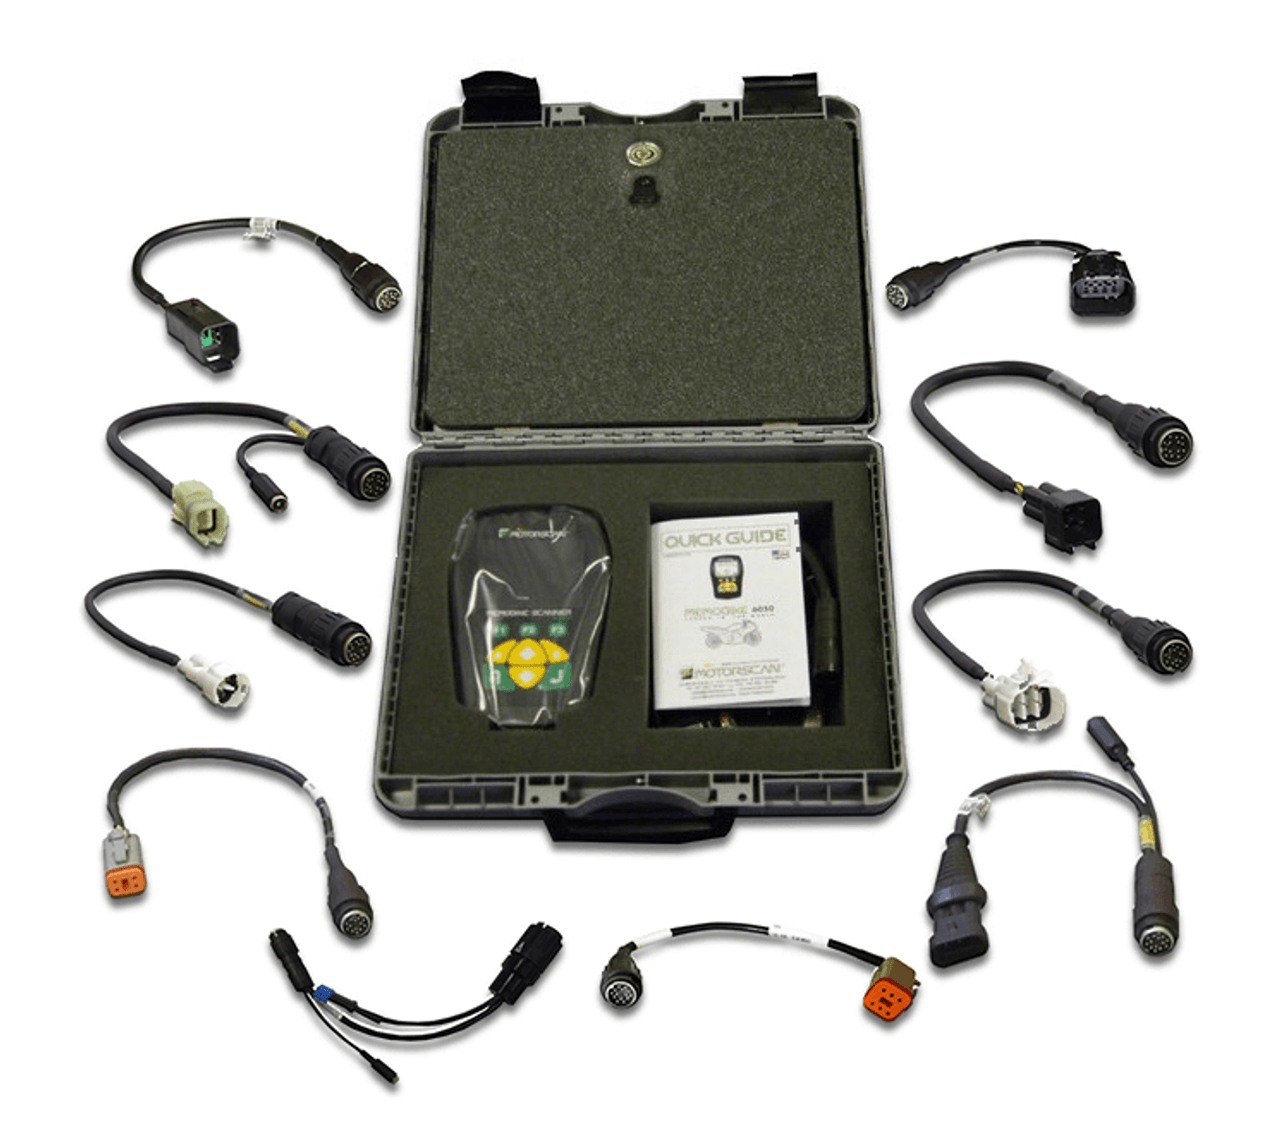 ANSED DIAGNOSTICS MS6050DMM MOTORCYCLE & POWERSPORTS DIAGNOSTIC SCAN TOOL KIT